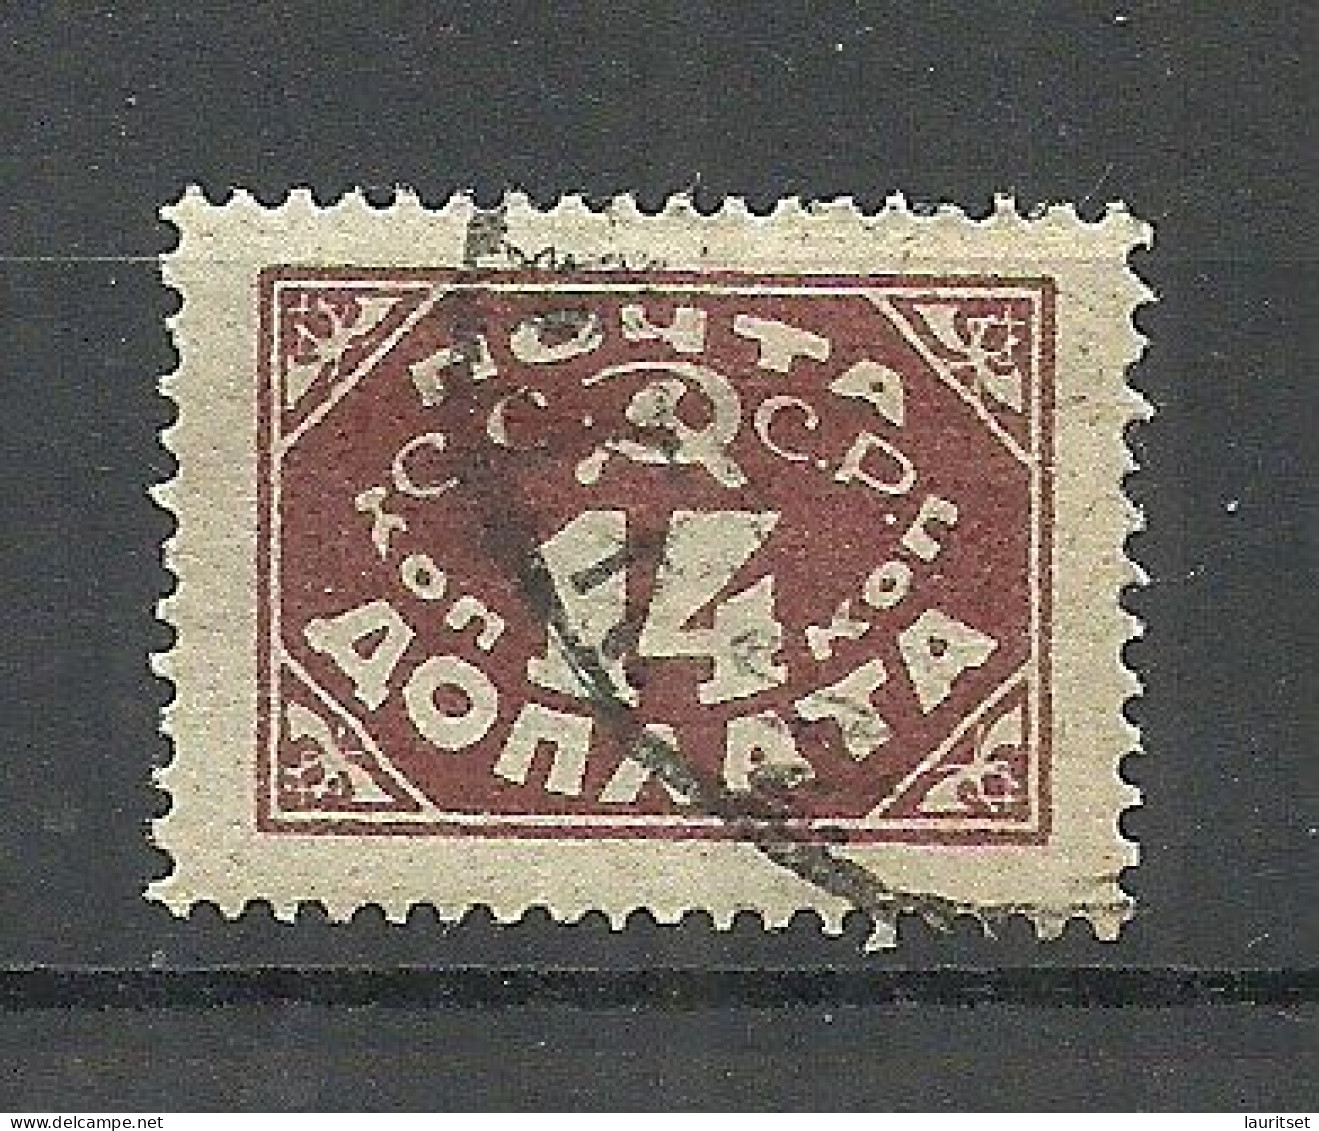 RUSSLAND RUSSIA 1925 Porto Postage Due Michel 17 I B (perf 14 1/2:14 Without WM) O - Tasse